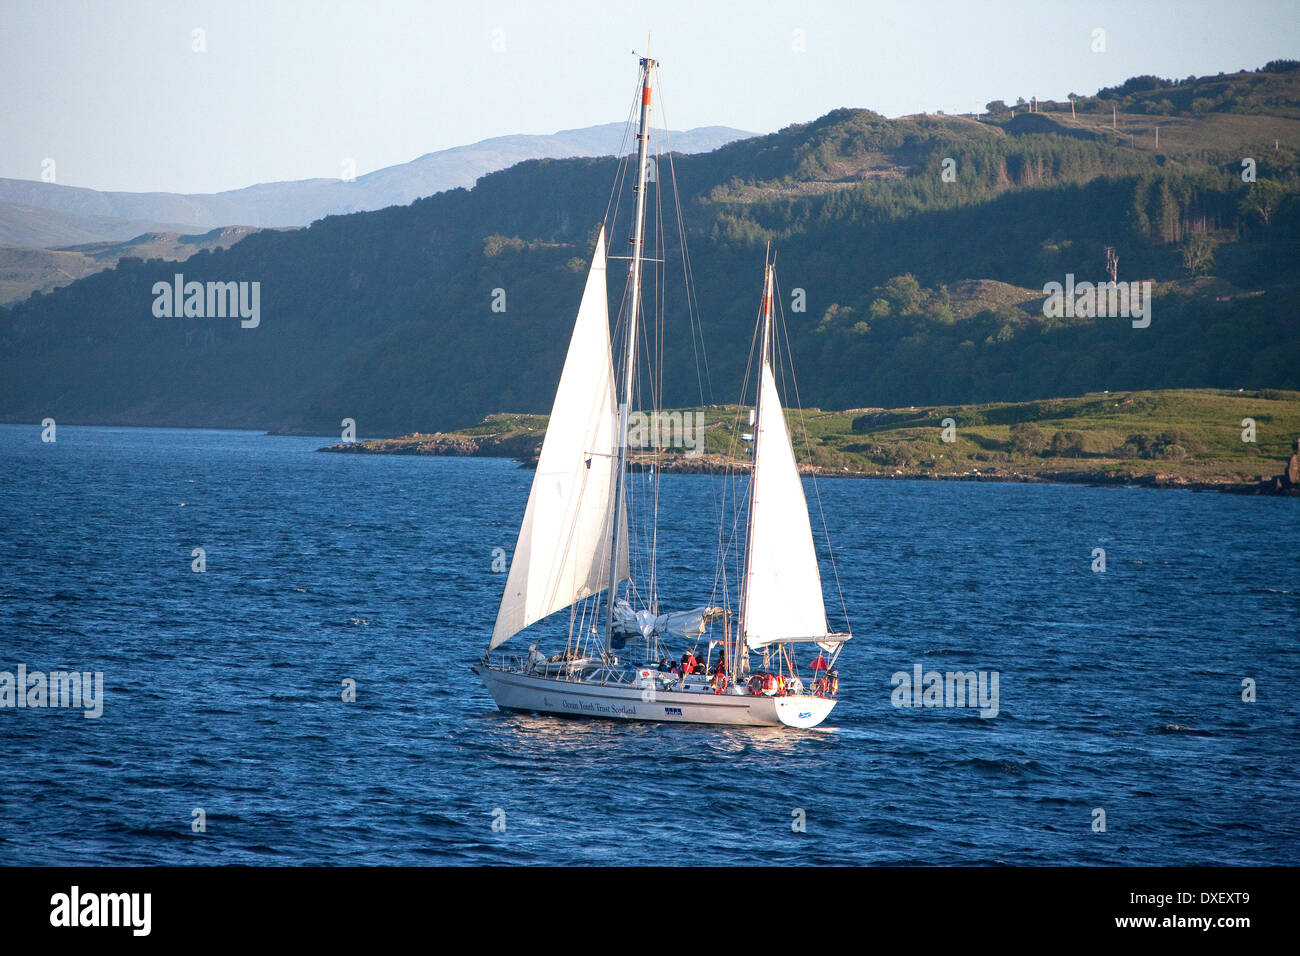 yacht sails past the island of mull coastline in the sound of mull.argyll. Stock Photo